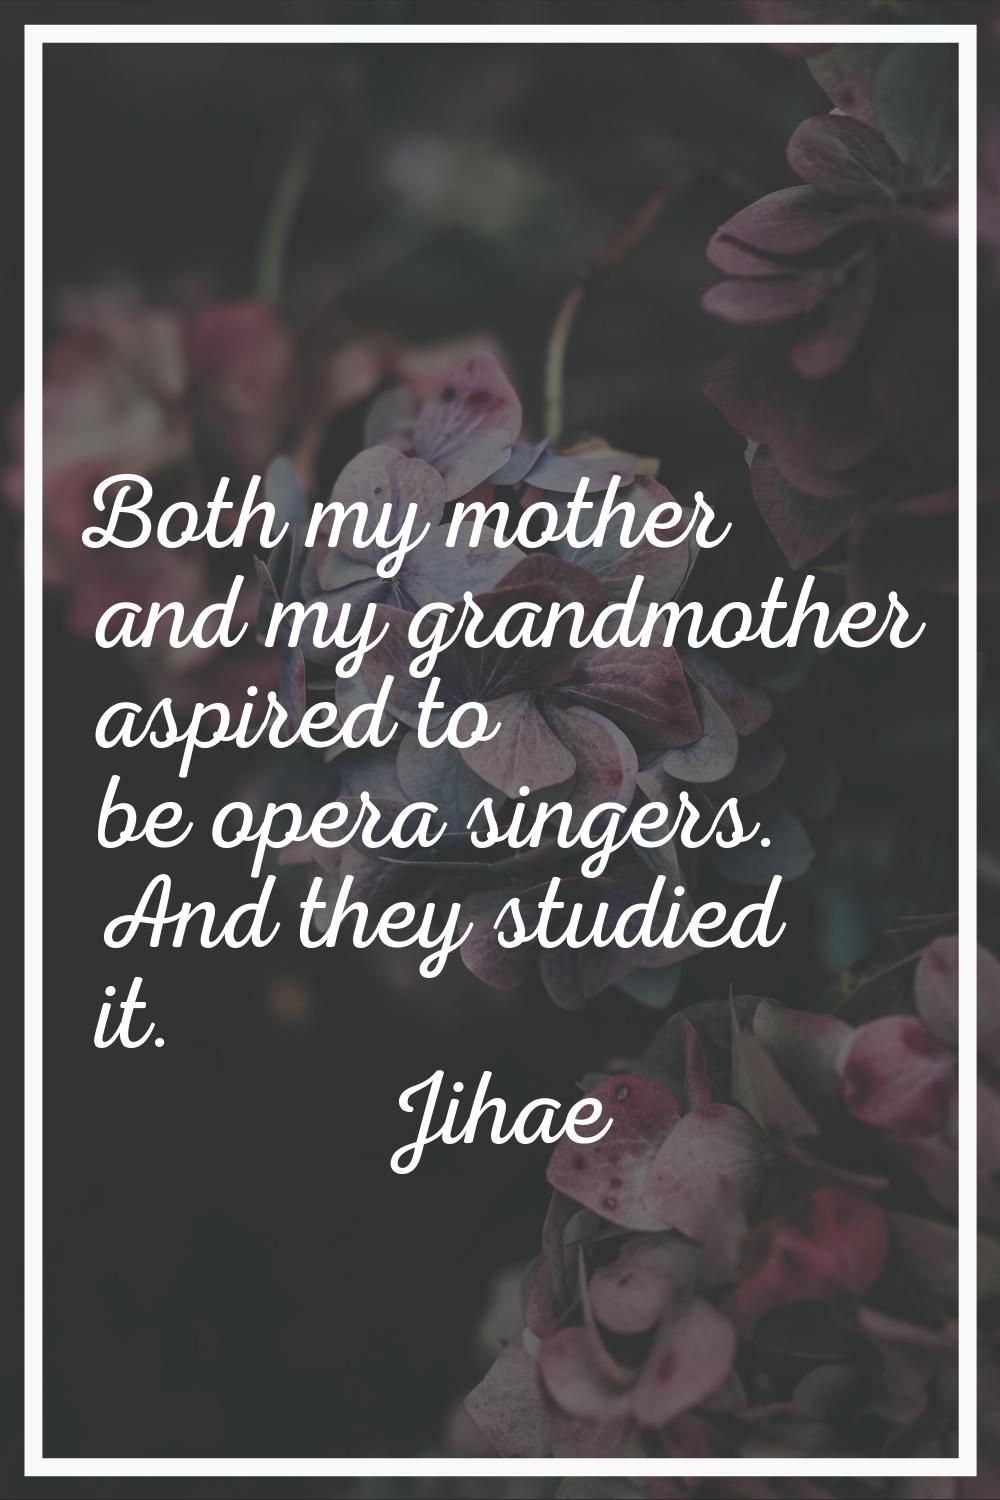 Both my mother and my grandmother aspired to be opera singers. And they studied it.